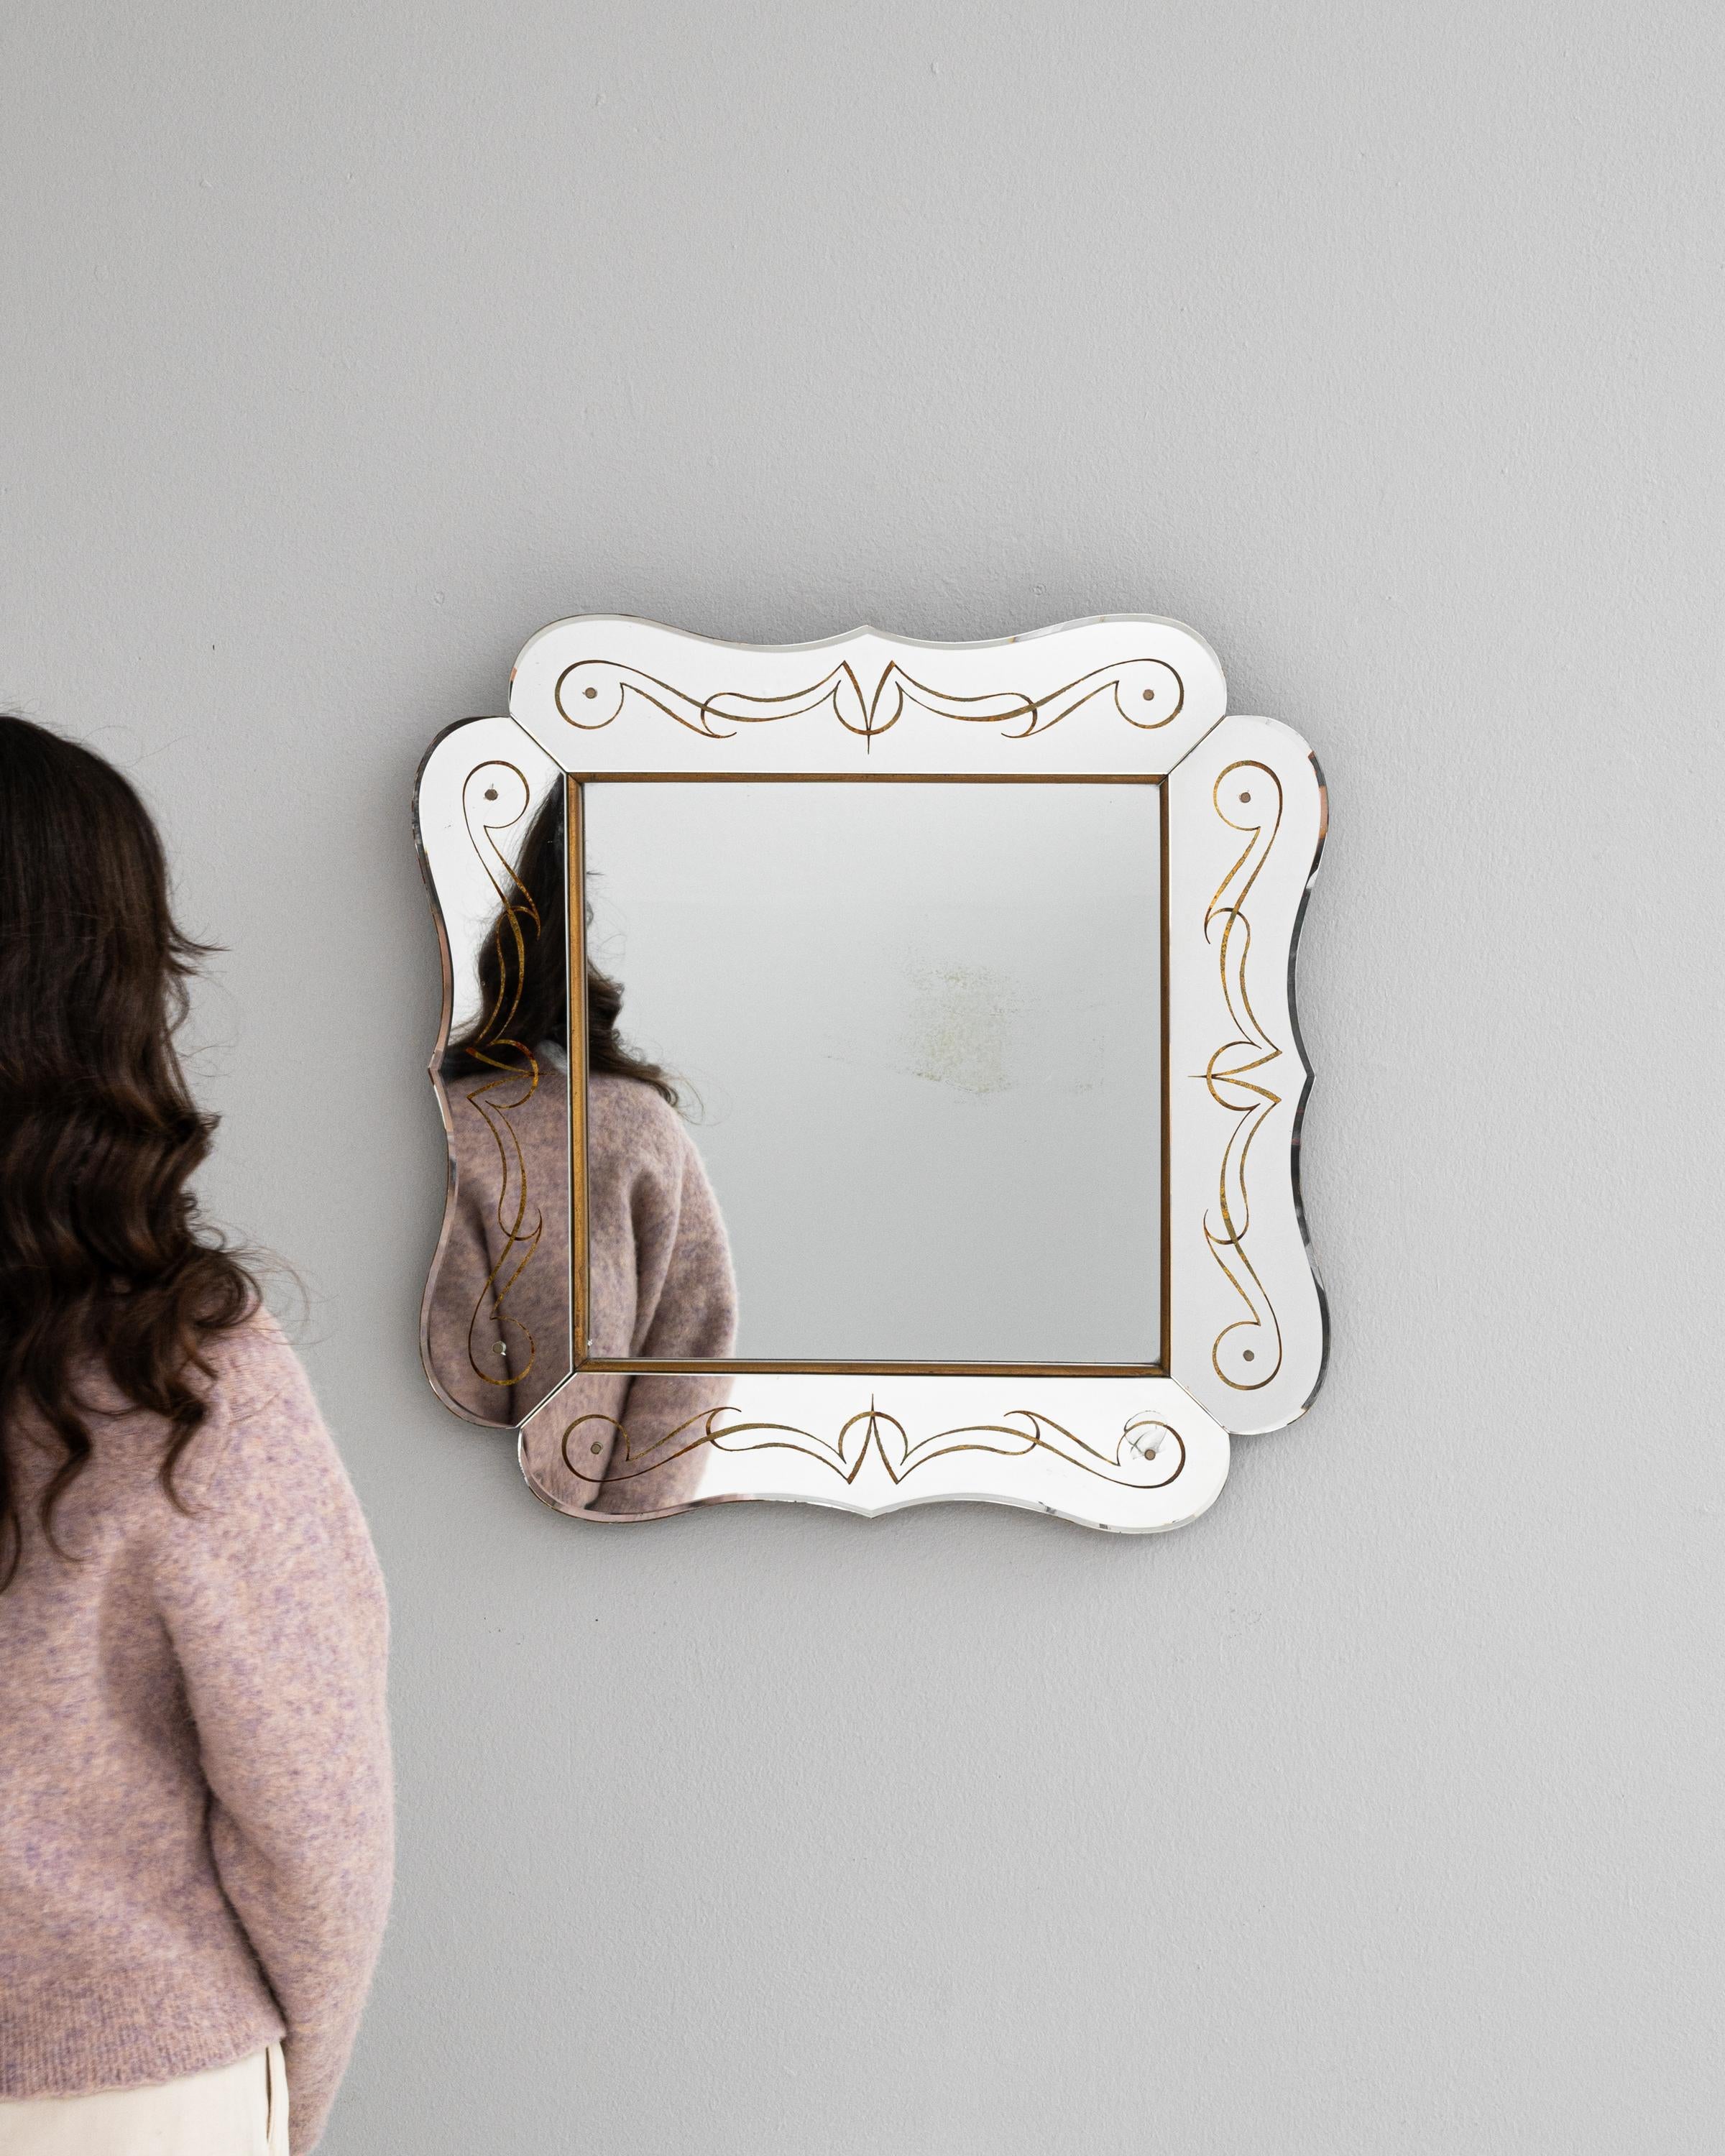 Step into a world of vintage luxury with this captivating 20th Century Italian Mirror, where classic design meets playful sophistication. The charming white frame, accented with graceful gold swirls, exudes an air of opulence and delicate artistry.